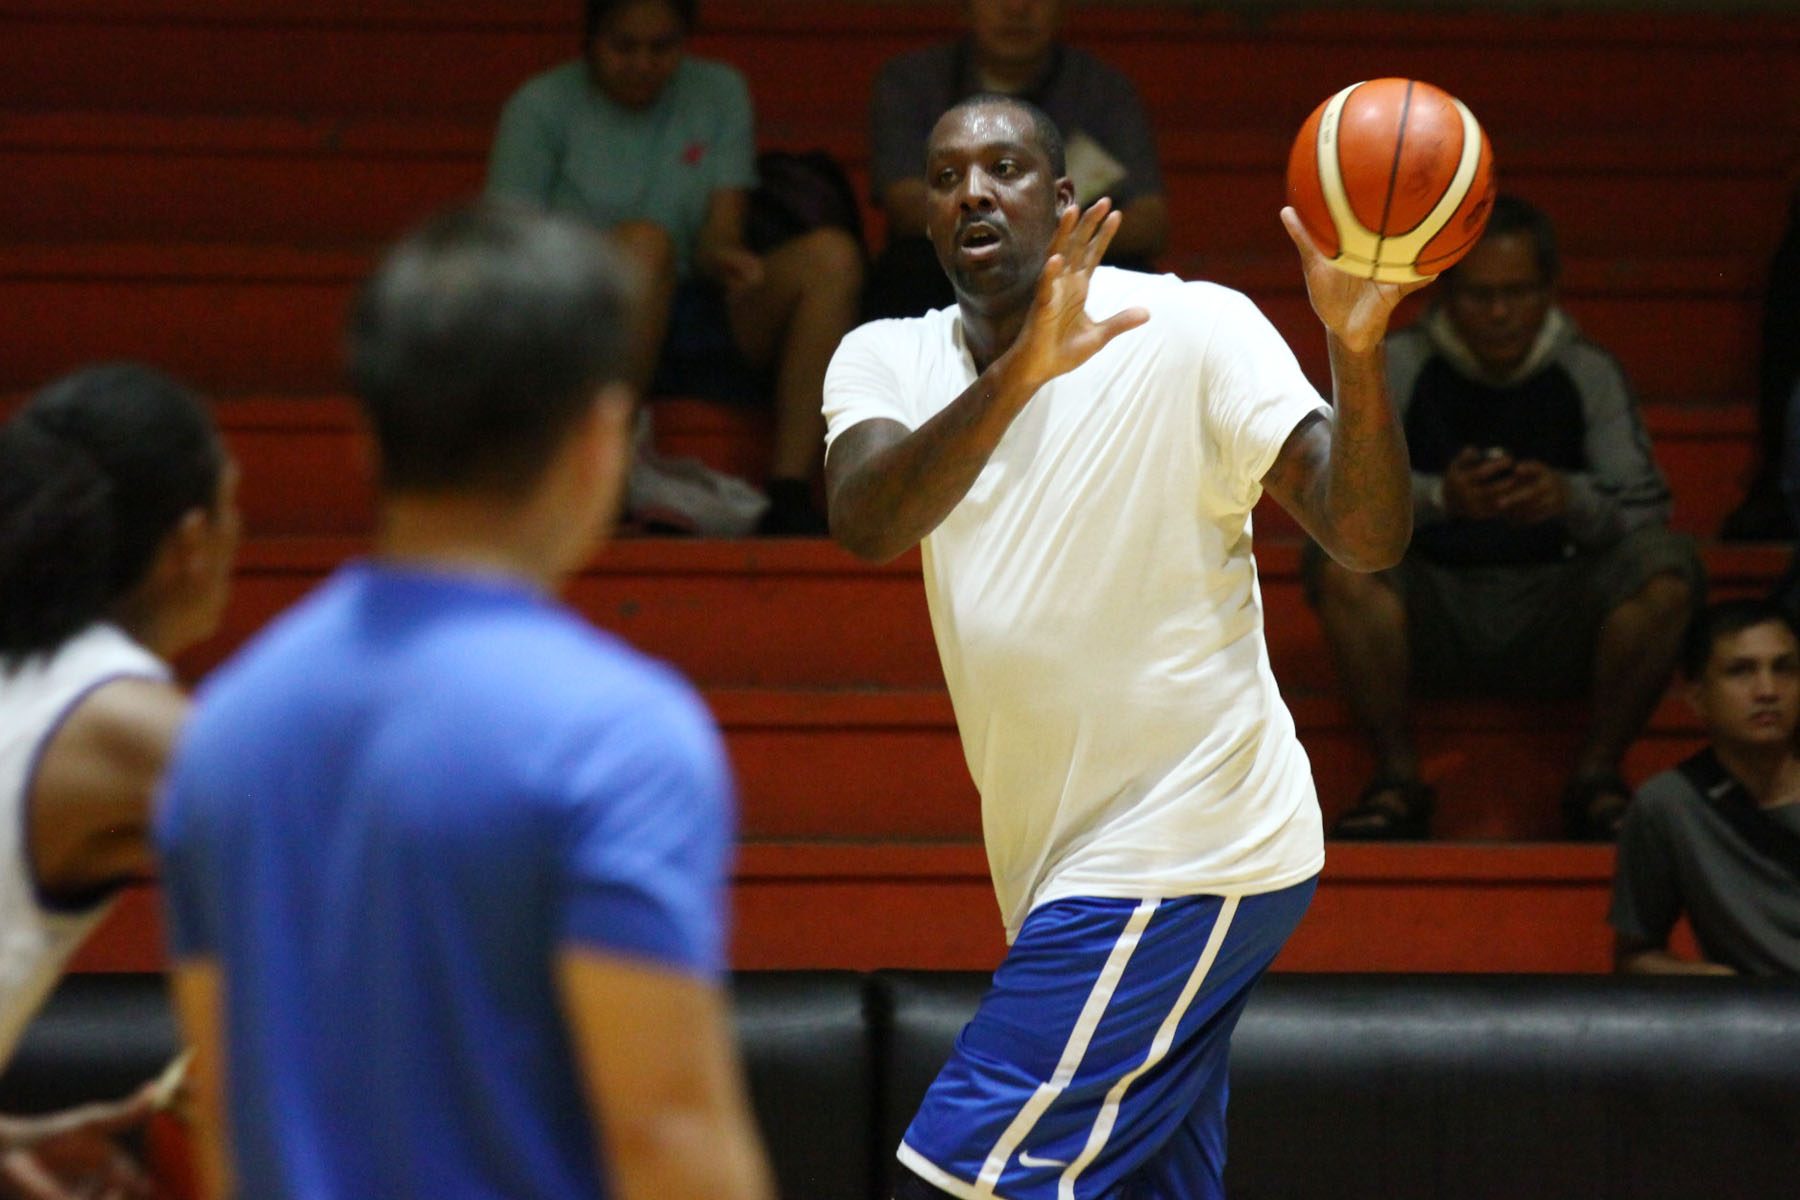 Blatche assures he’ll be back in game shape in a month